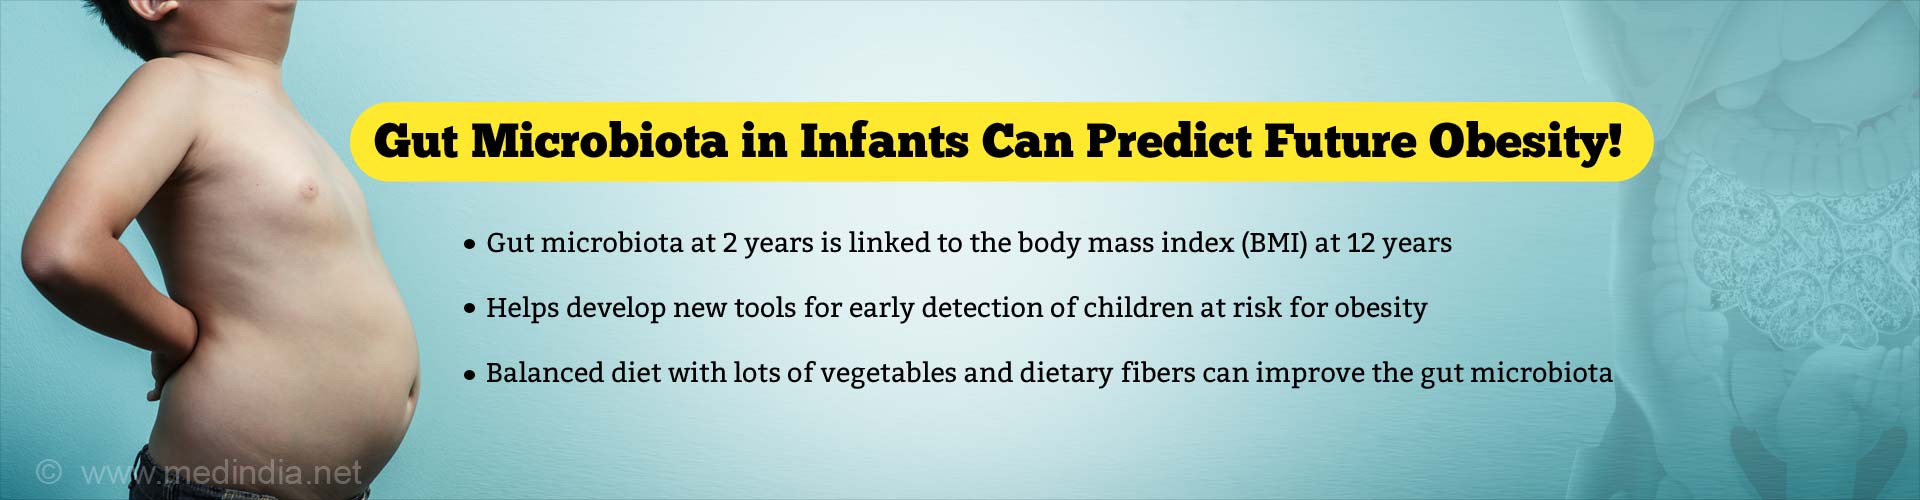 Gut Microbiota in Infants Linked to Future Obesity